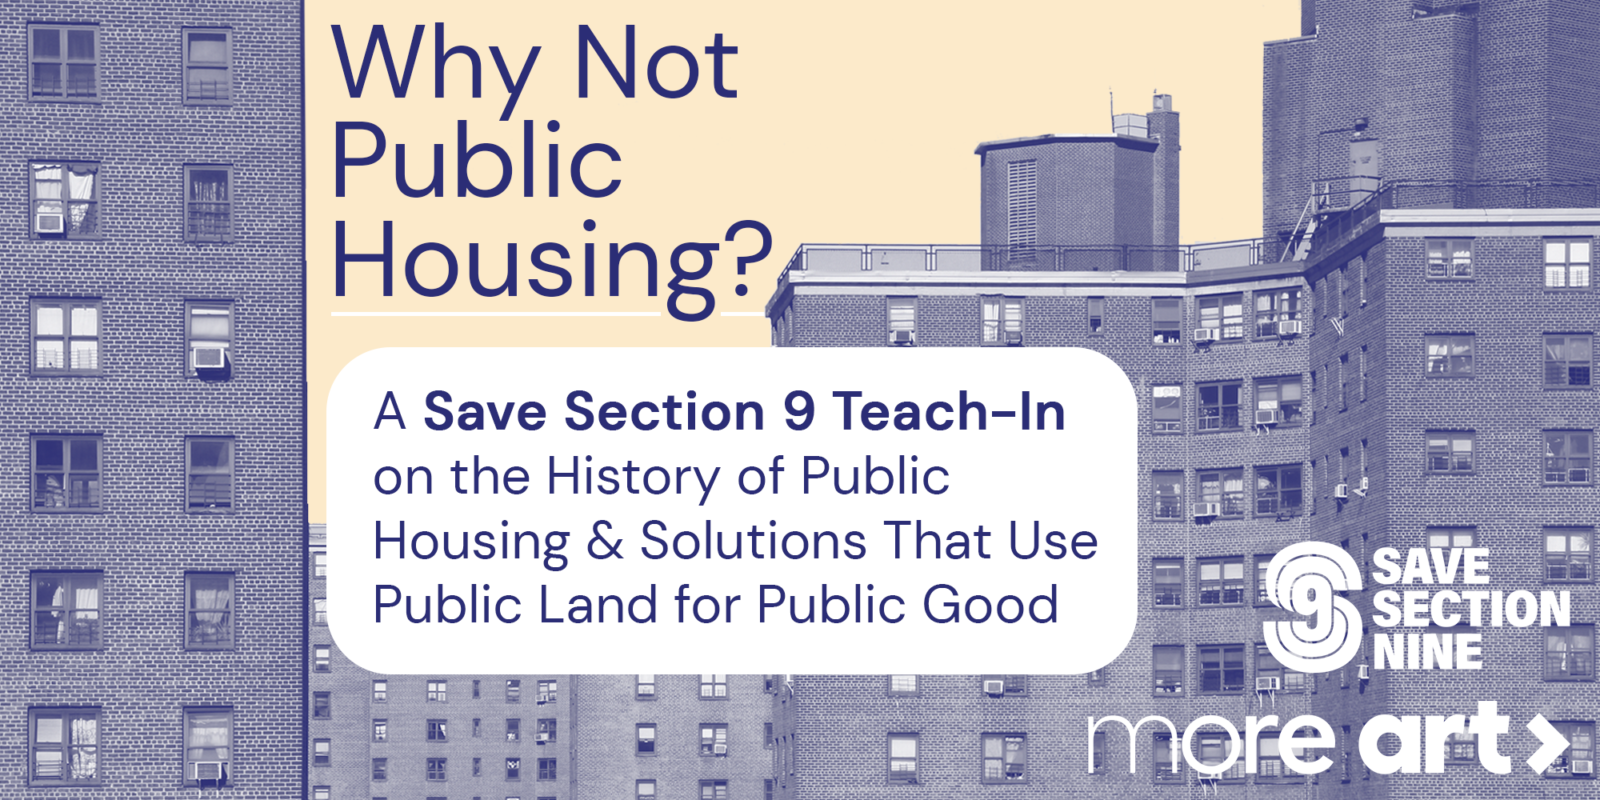 Blue text on a white background reads: Why Not Public Housing? A Save Section 9 Teach In on the History of Public Housing and solutions that use public land for public good. In the background is a blue tinted image of public housing buildings in New York.